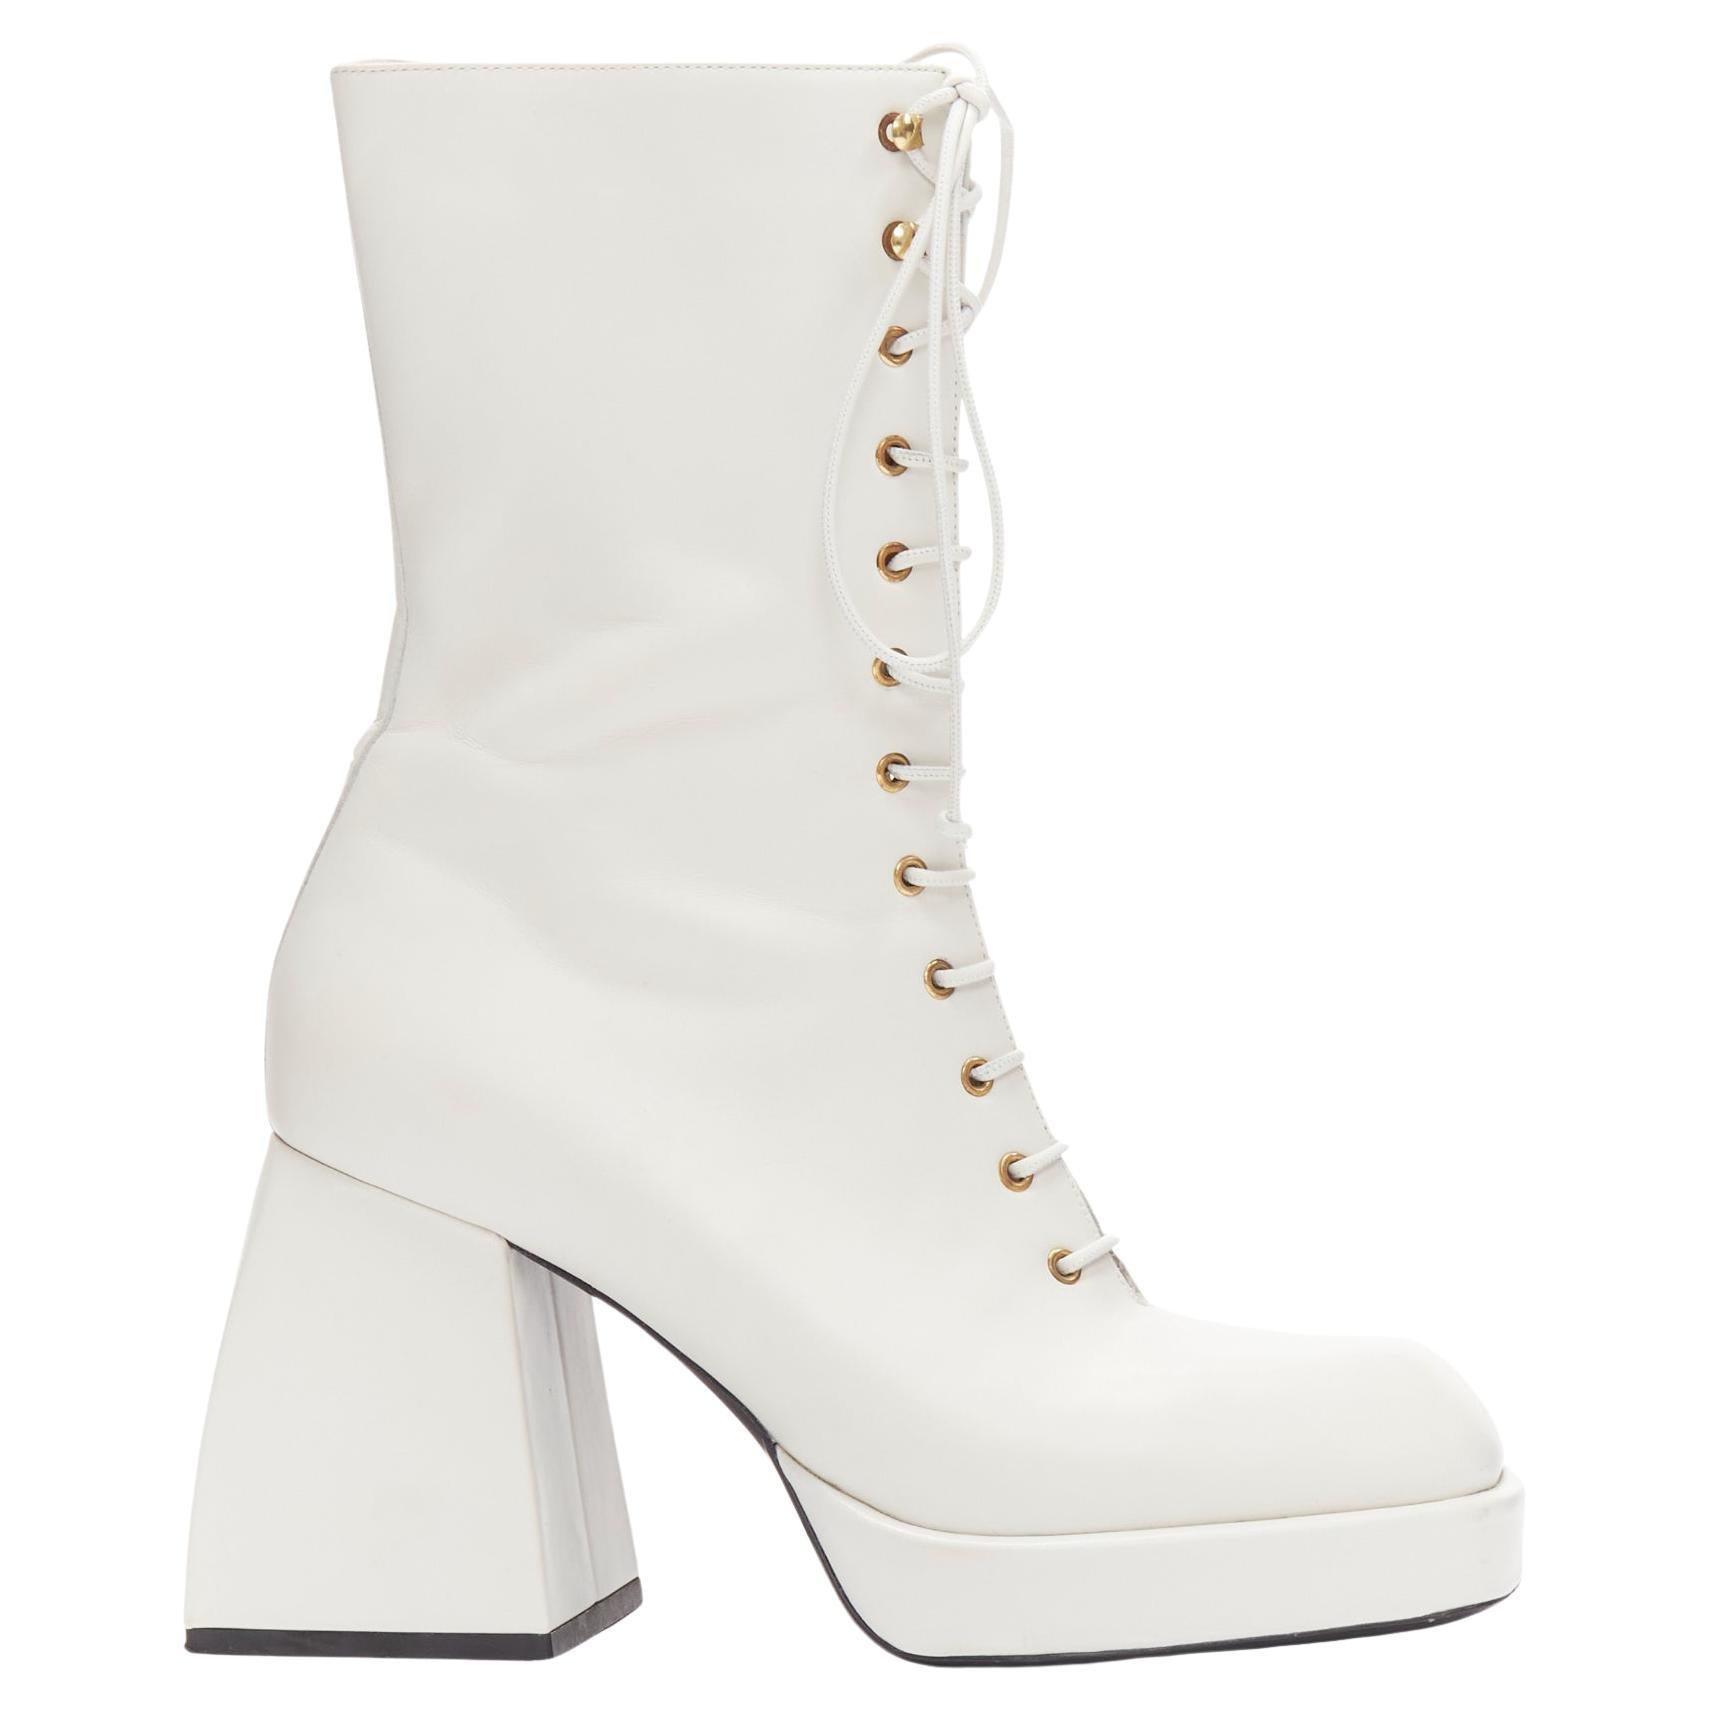 NODALETO Bulla Candy white leather chunky heels lace up boots EU38 For Sale